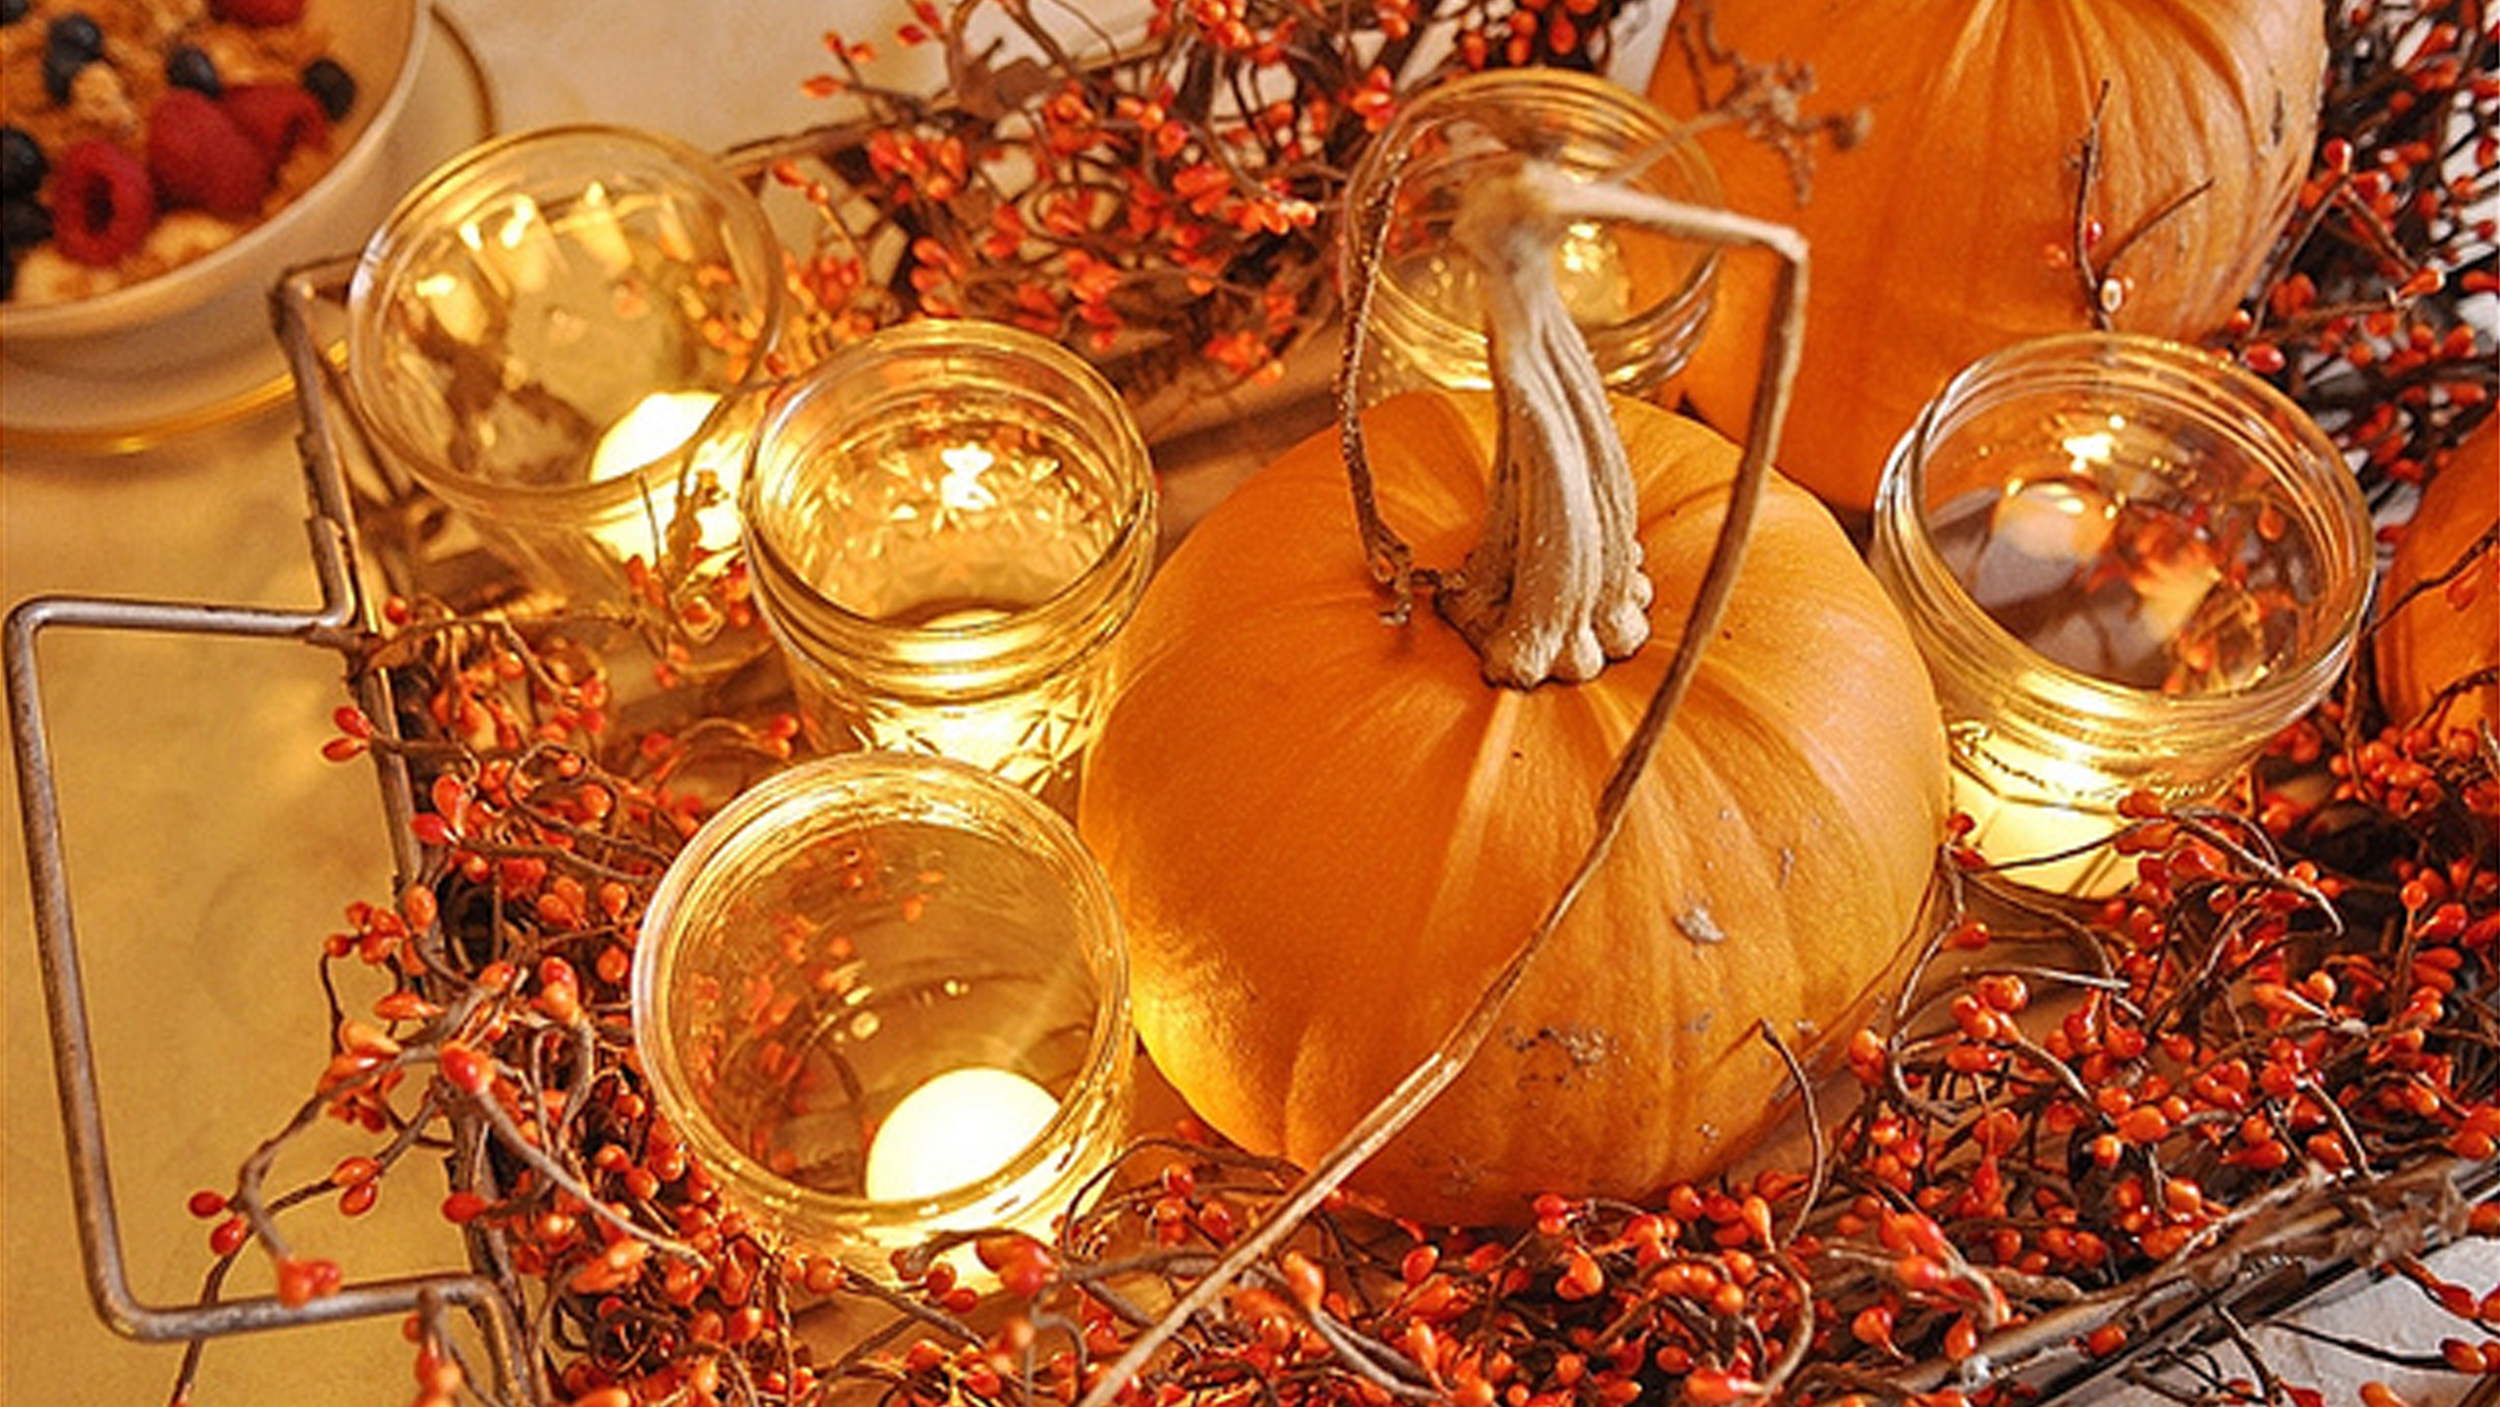 Thanksgiving decorations: DIY pumpkin centerpieces for your table - Table Centerpieces Ideas For Thanksgiving